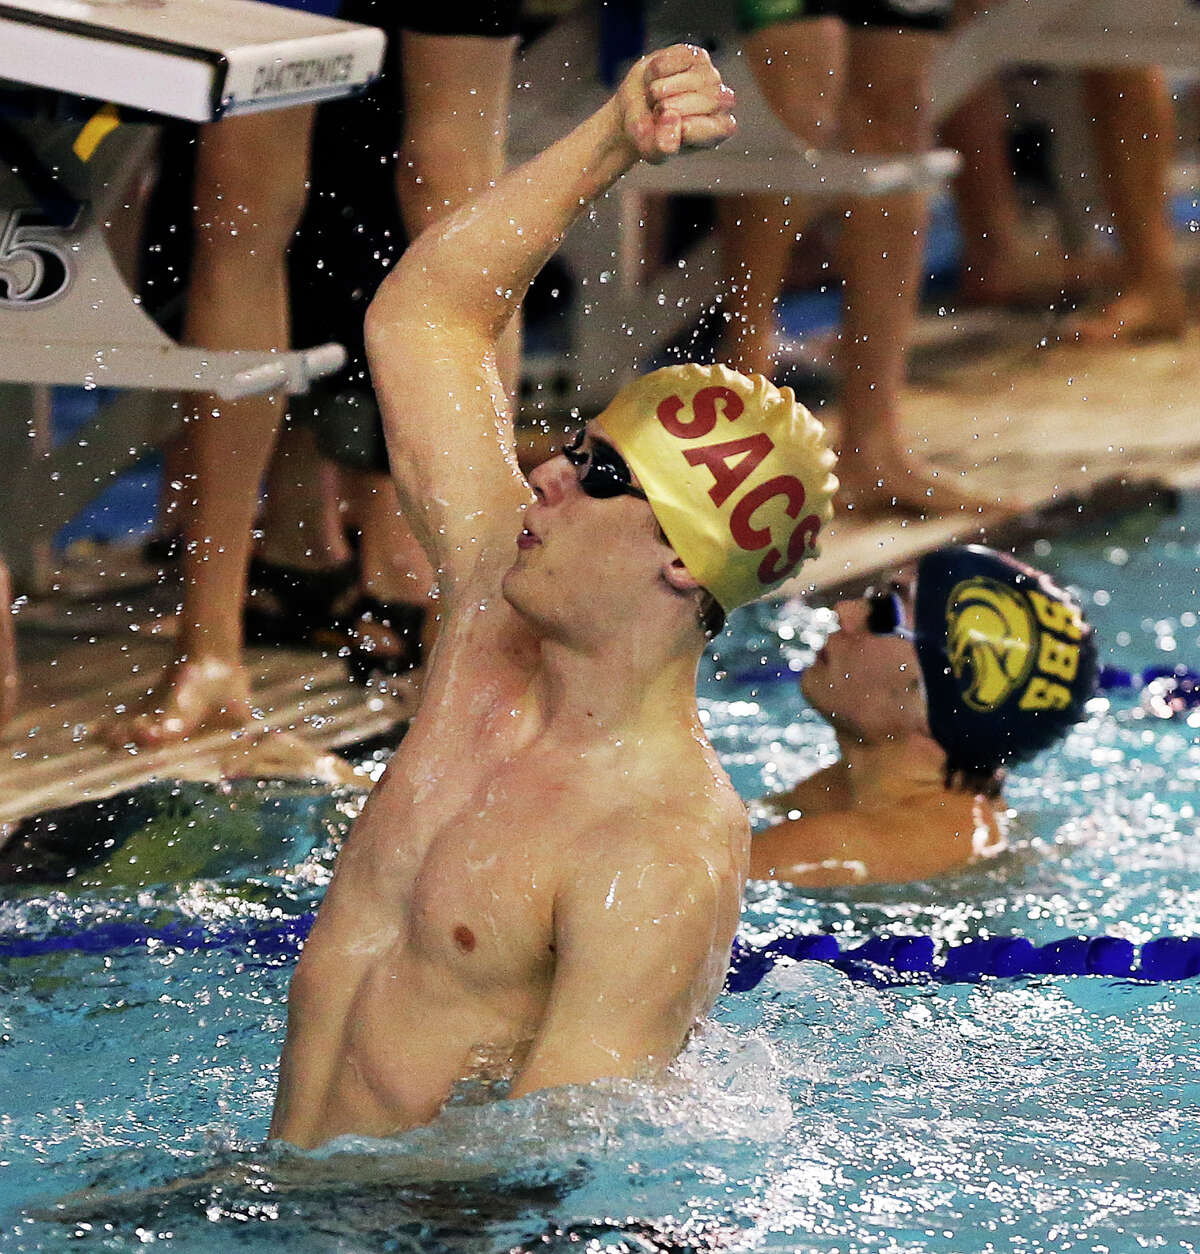 San Antonio Christian's John Johnson pumps his fist after coming from behind on the final leg of the 200 yard freestyle relay to win the gold in a close finish during the TAPPS Division II state championships at the Josh Davis Natatorium on February 13, 2015